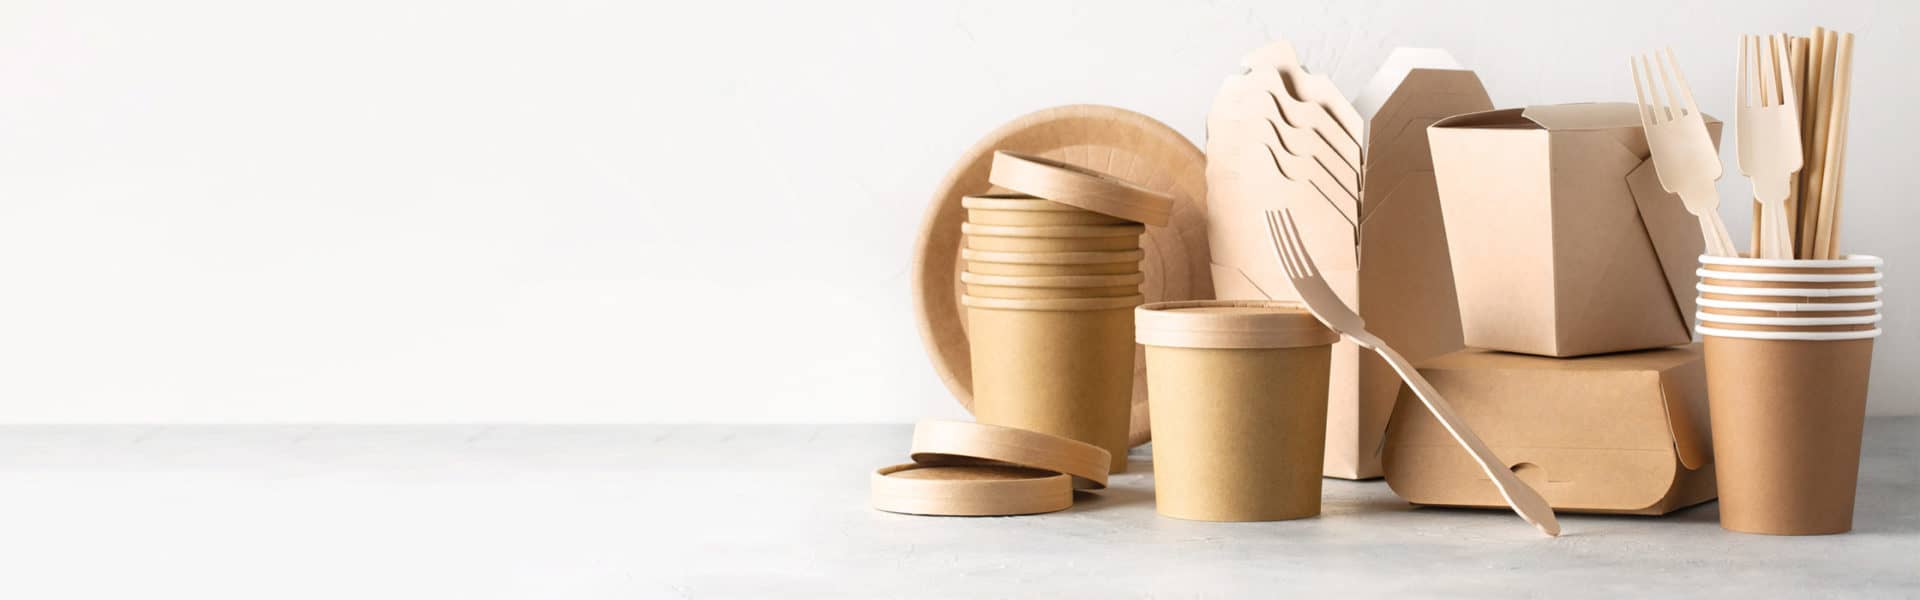 Sustainable kraft food containers and cutlery